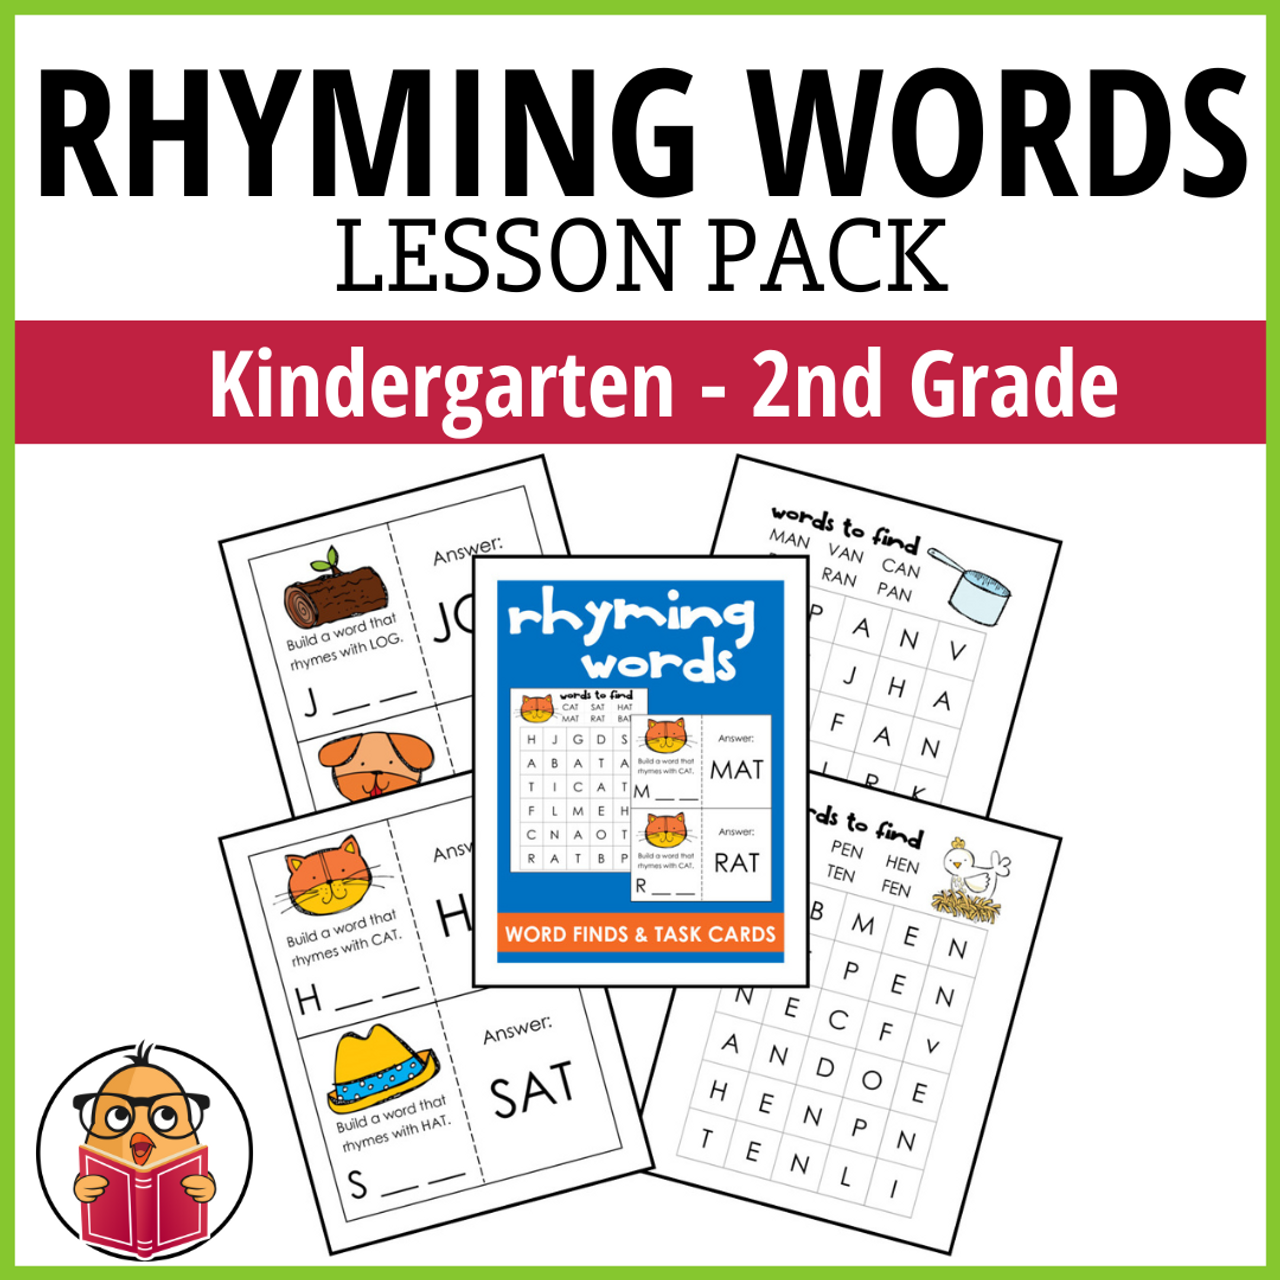 Rhyming Words Lesson Pack- K - 2nd